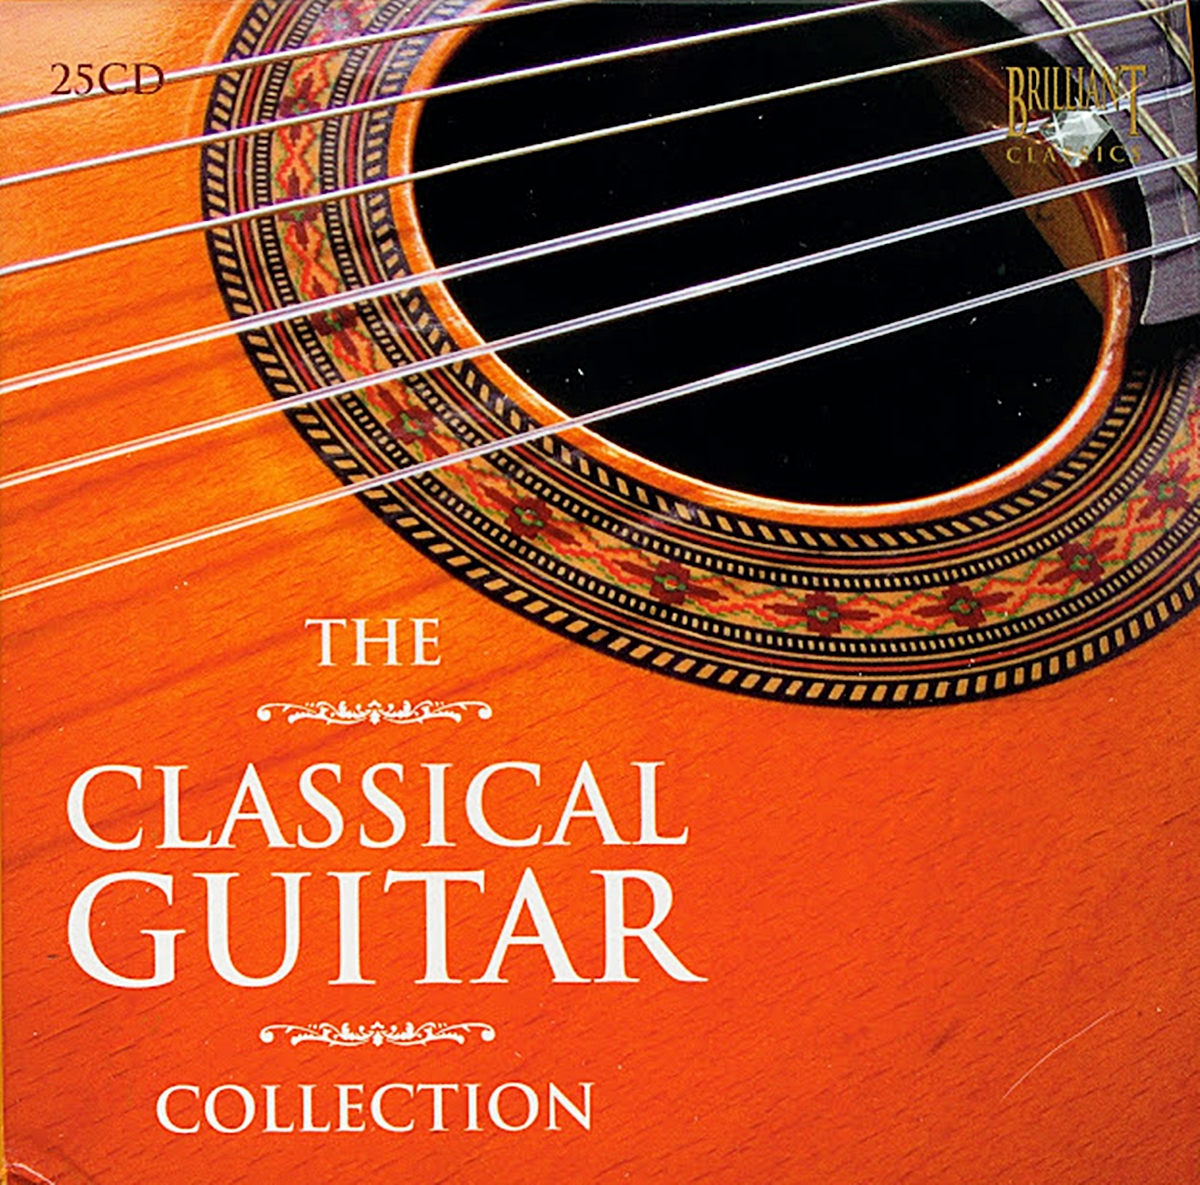 [Fshare] - Classical Guitar - V.A The Classical Guitar Collection – Box